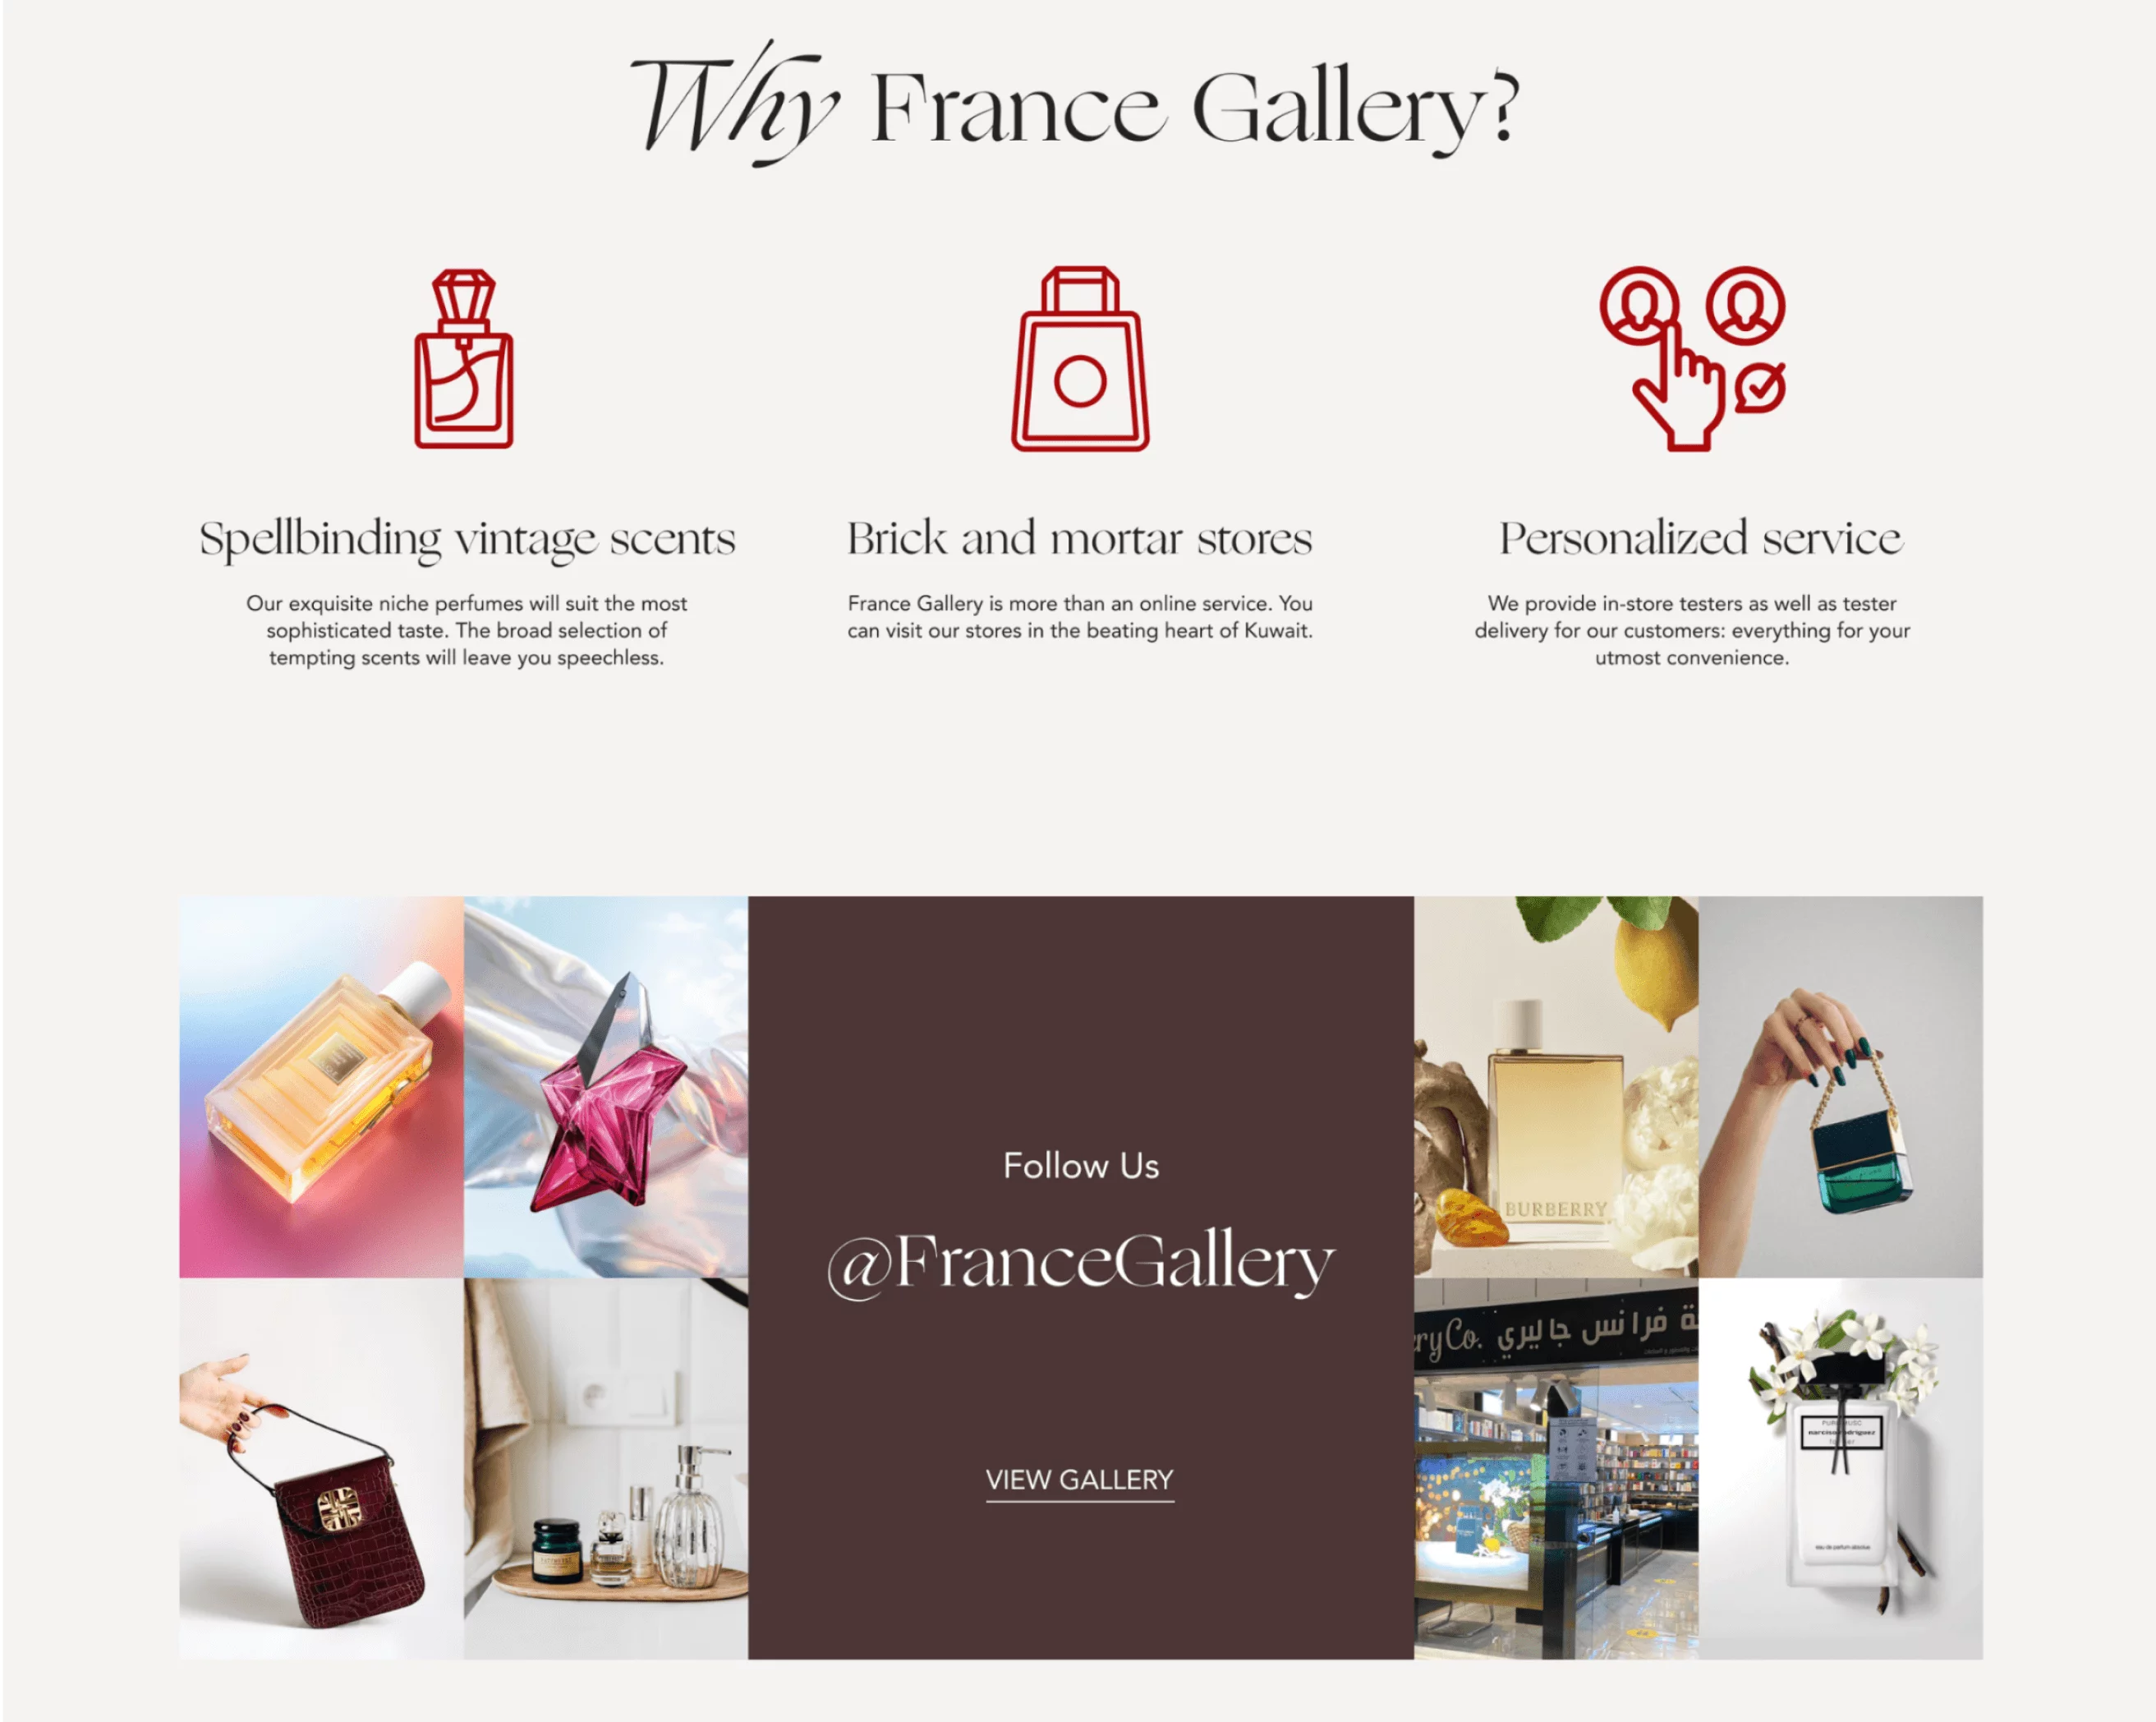 France Gallery case study